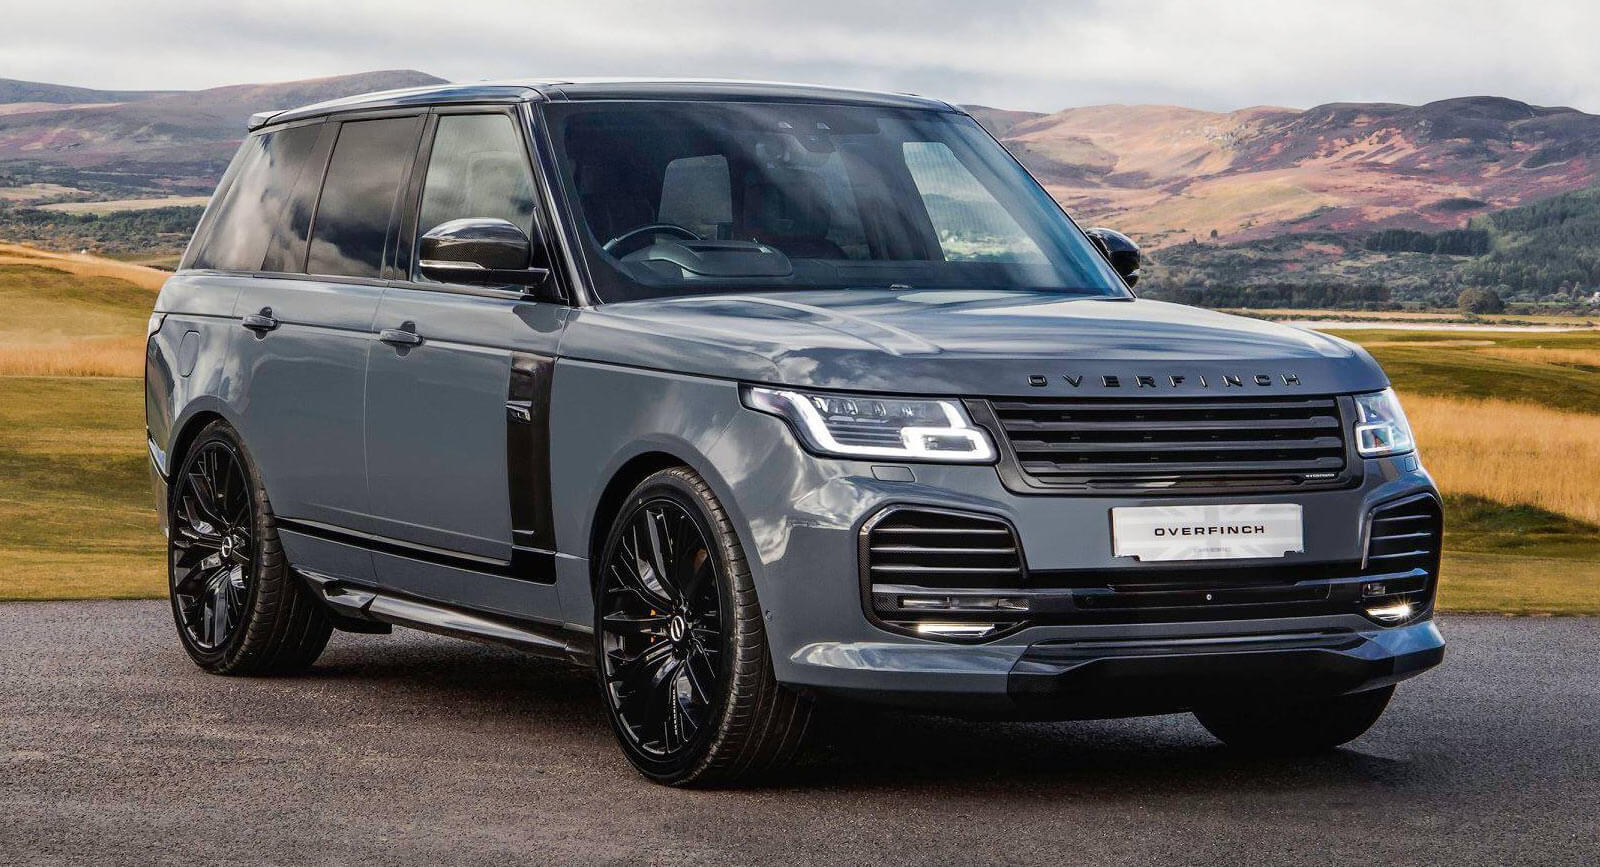 2018 Overfinch Range Rover Is One Seriously Stylish Suv Carscoops